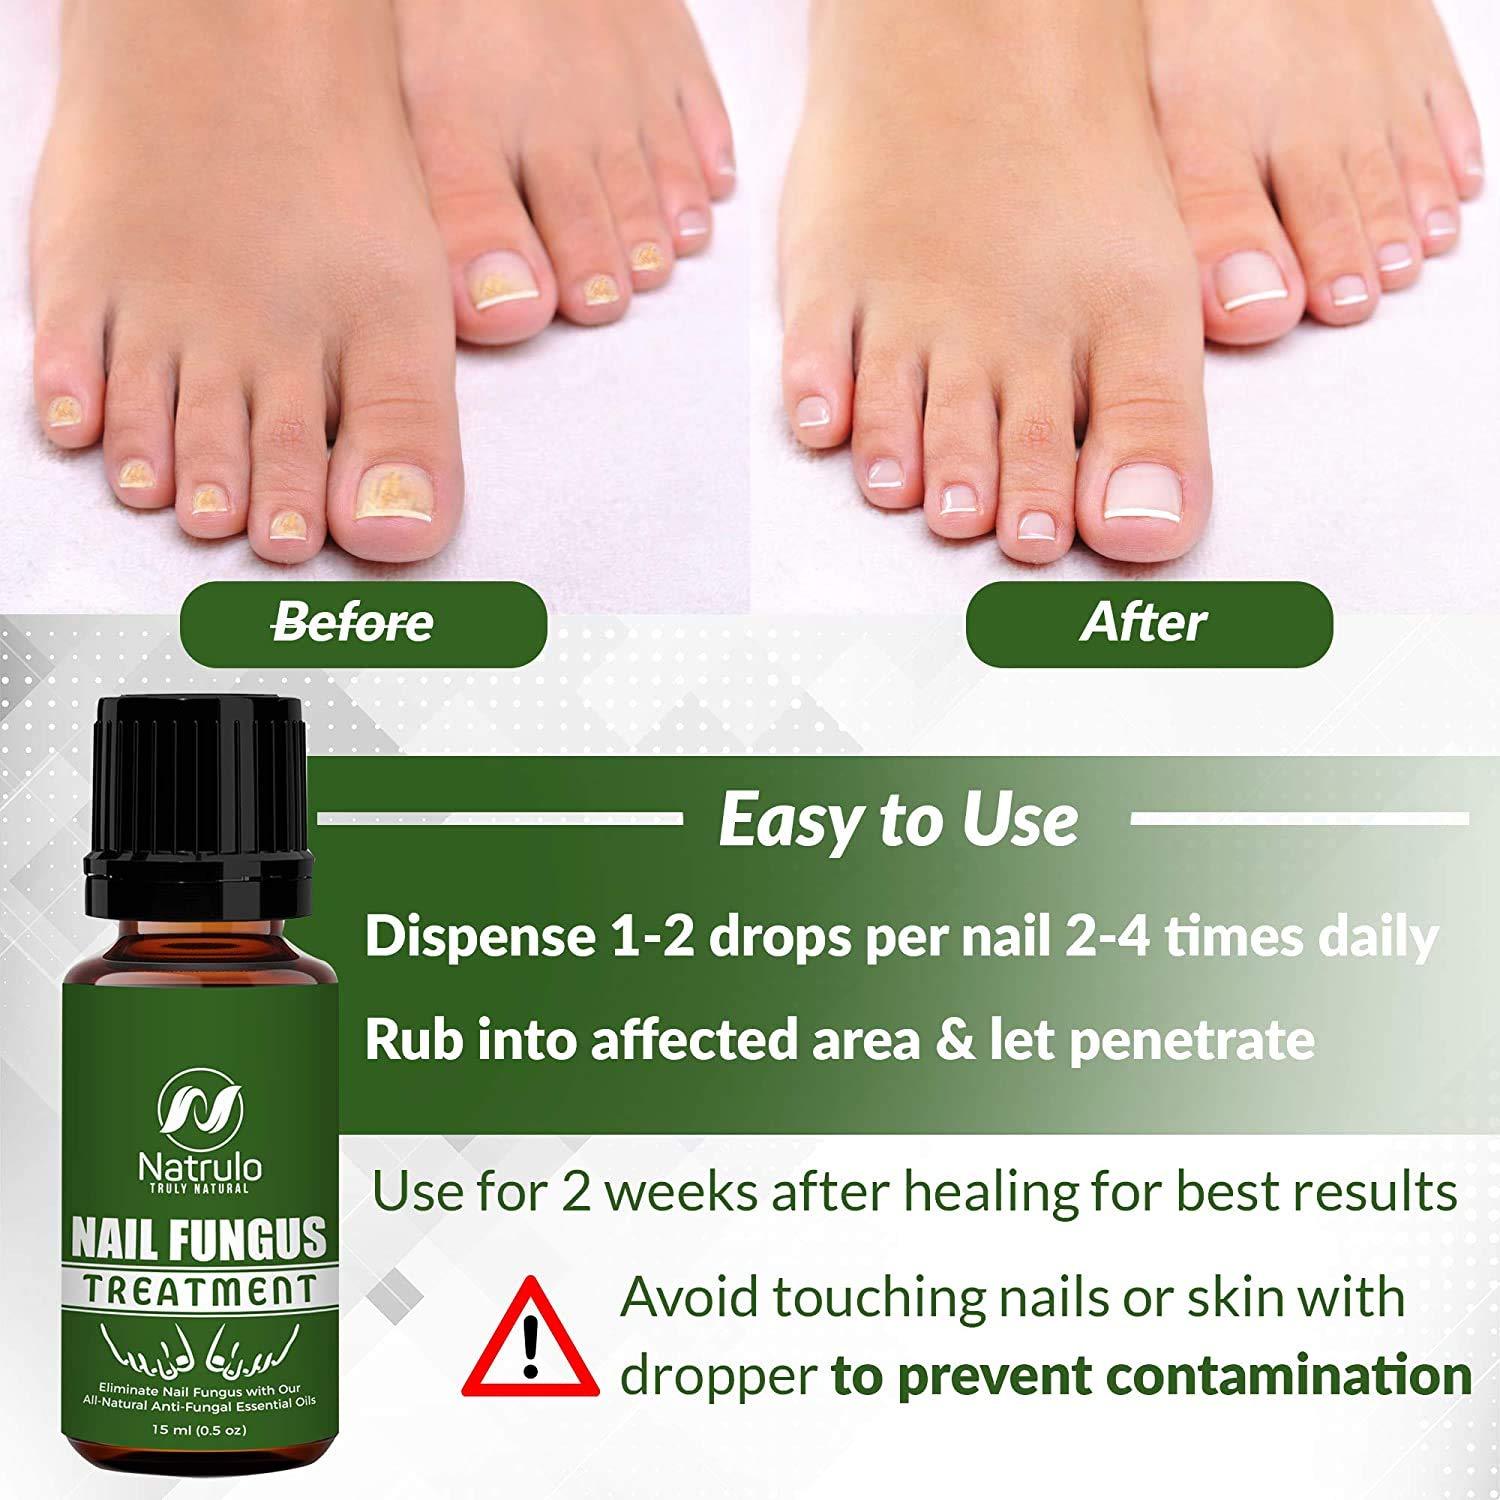 Does Home Laser Work on Toenail Fungus? — FOOT & ANKLE CENTERS